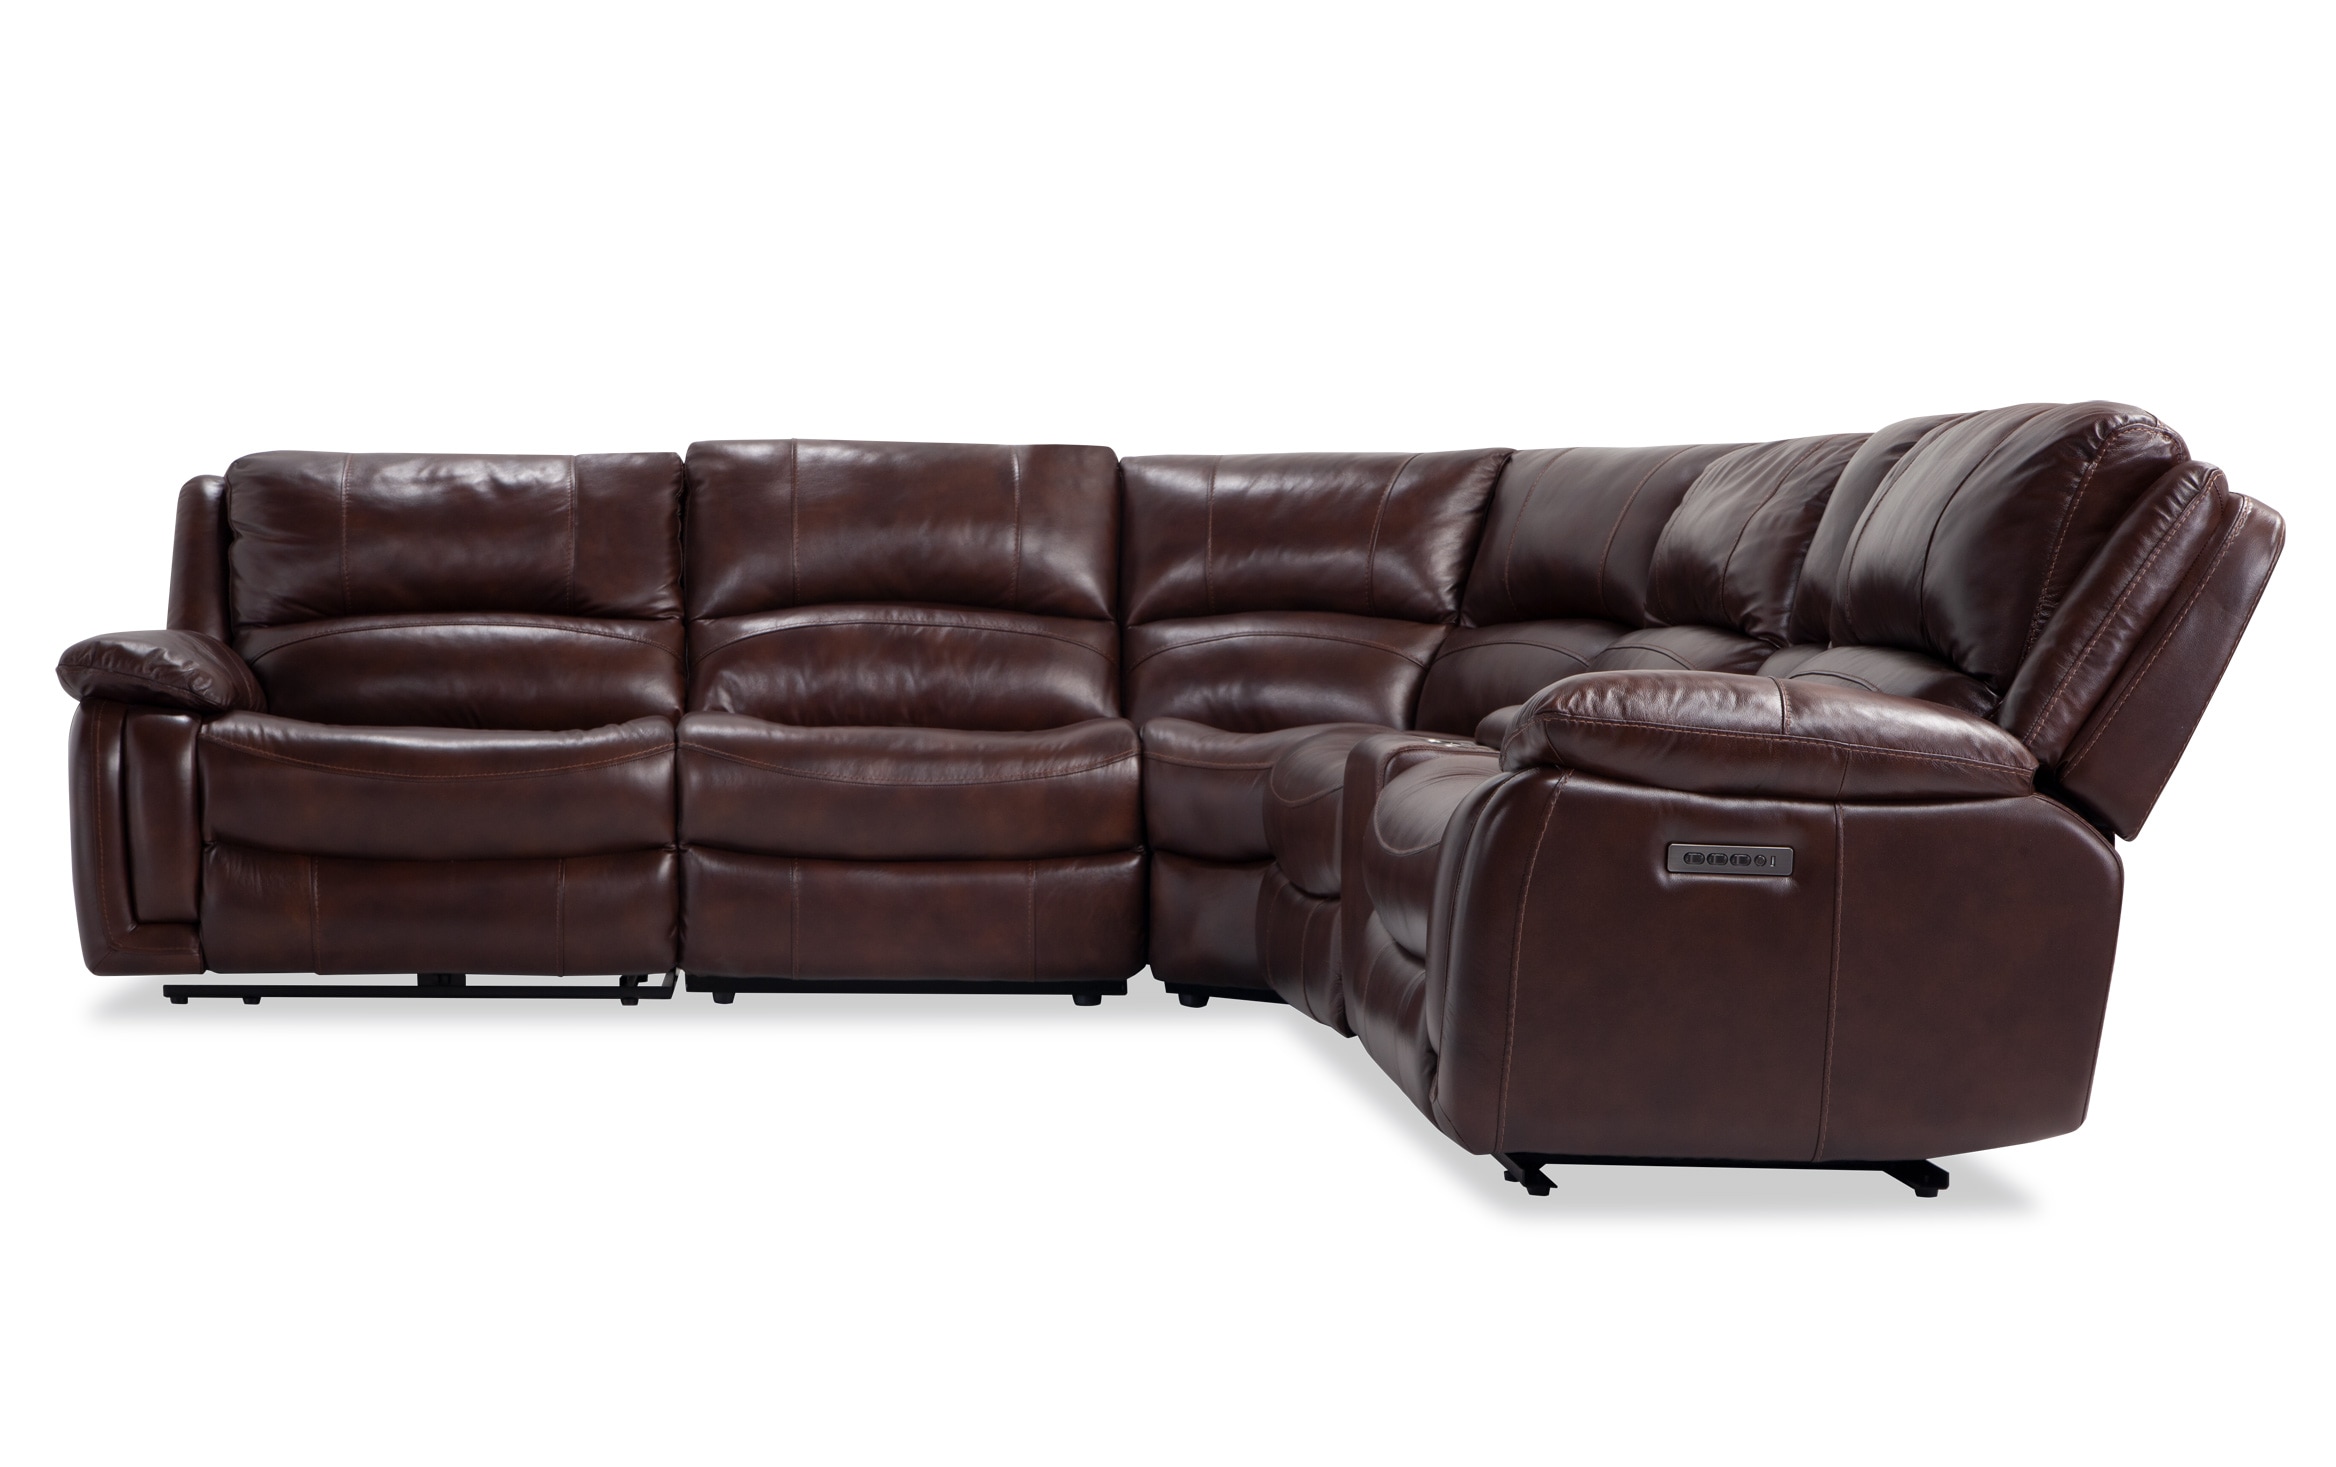 6 Piece Power Reclining Sectional, Danvors 7 Pc Leather Sectional Sofa With 3 Power Recliners